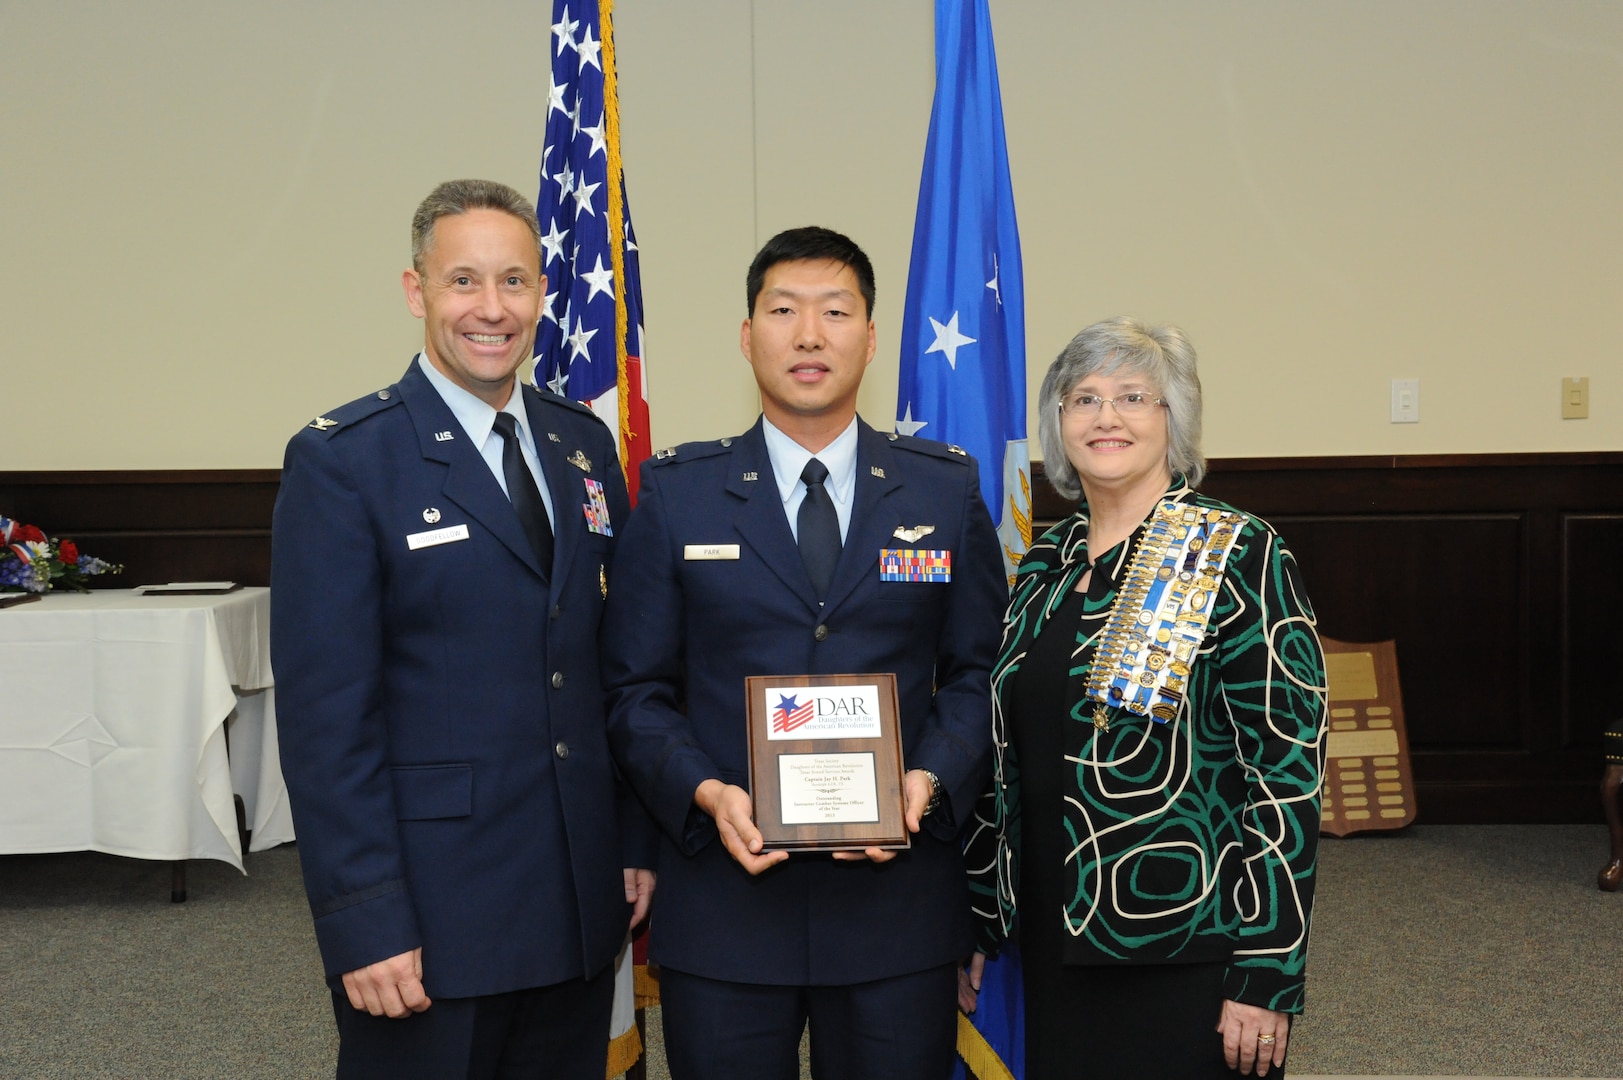 Col. Gerald Goodfellow, 12 Flying Training Wing commander, Joint Base San Antonio-Randolph, and Mrs. Susan Green Tillman, State Recording Secretary of Texas, Daughters of the American Revolution, present Capt. Jay H. Park with the Instructor Navigator/Combat Systems Officer of the Year Award. (U.S.Air Force Photo by Rich McFadden)